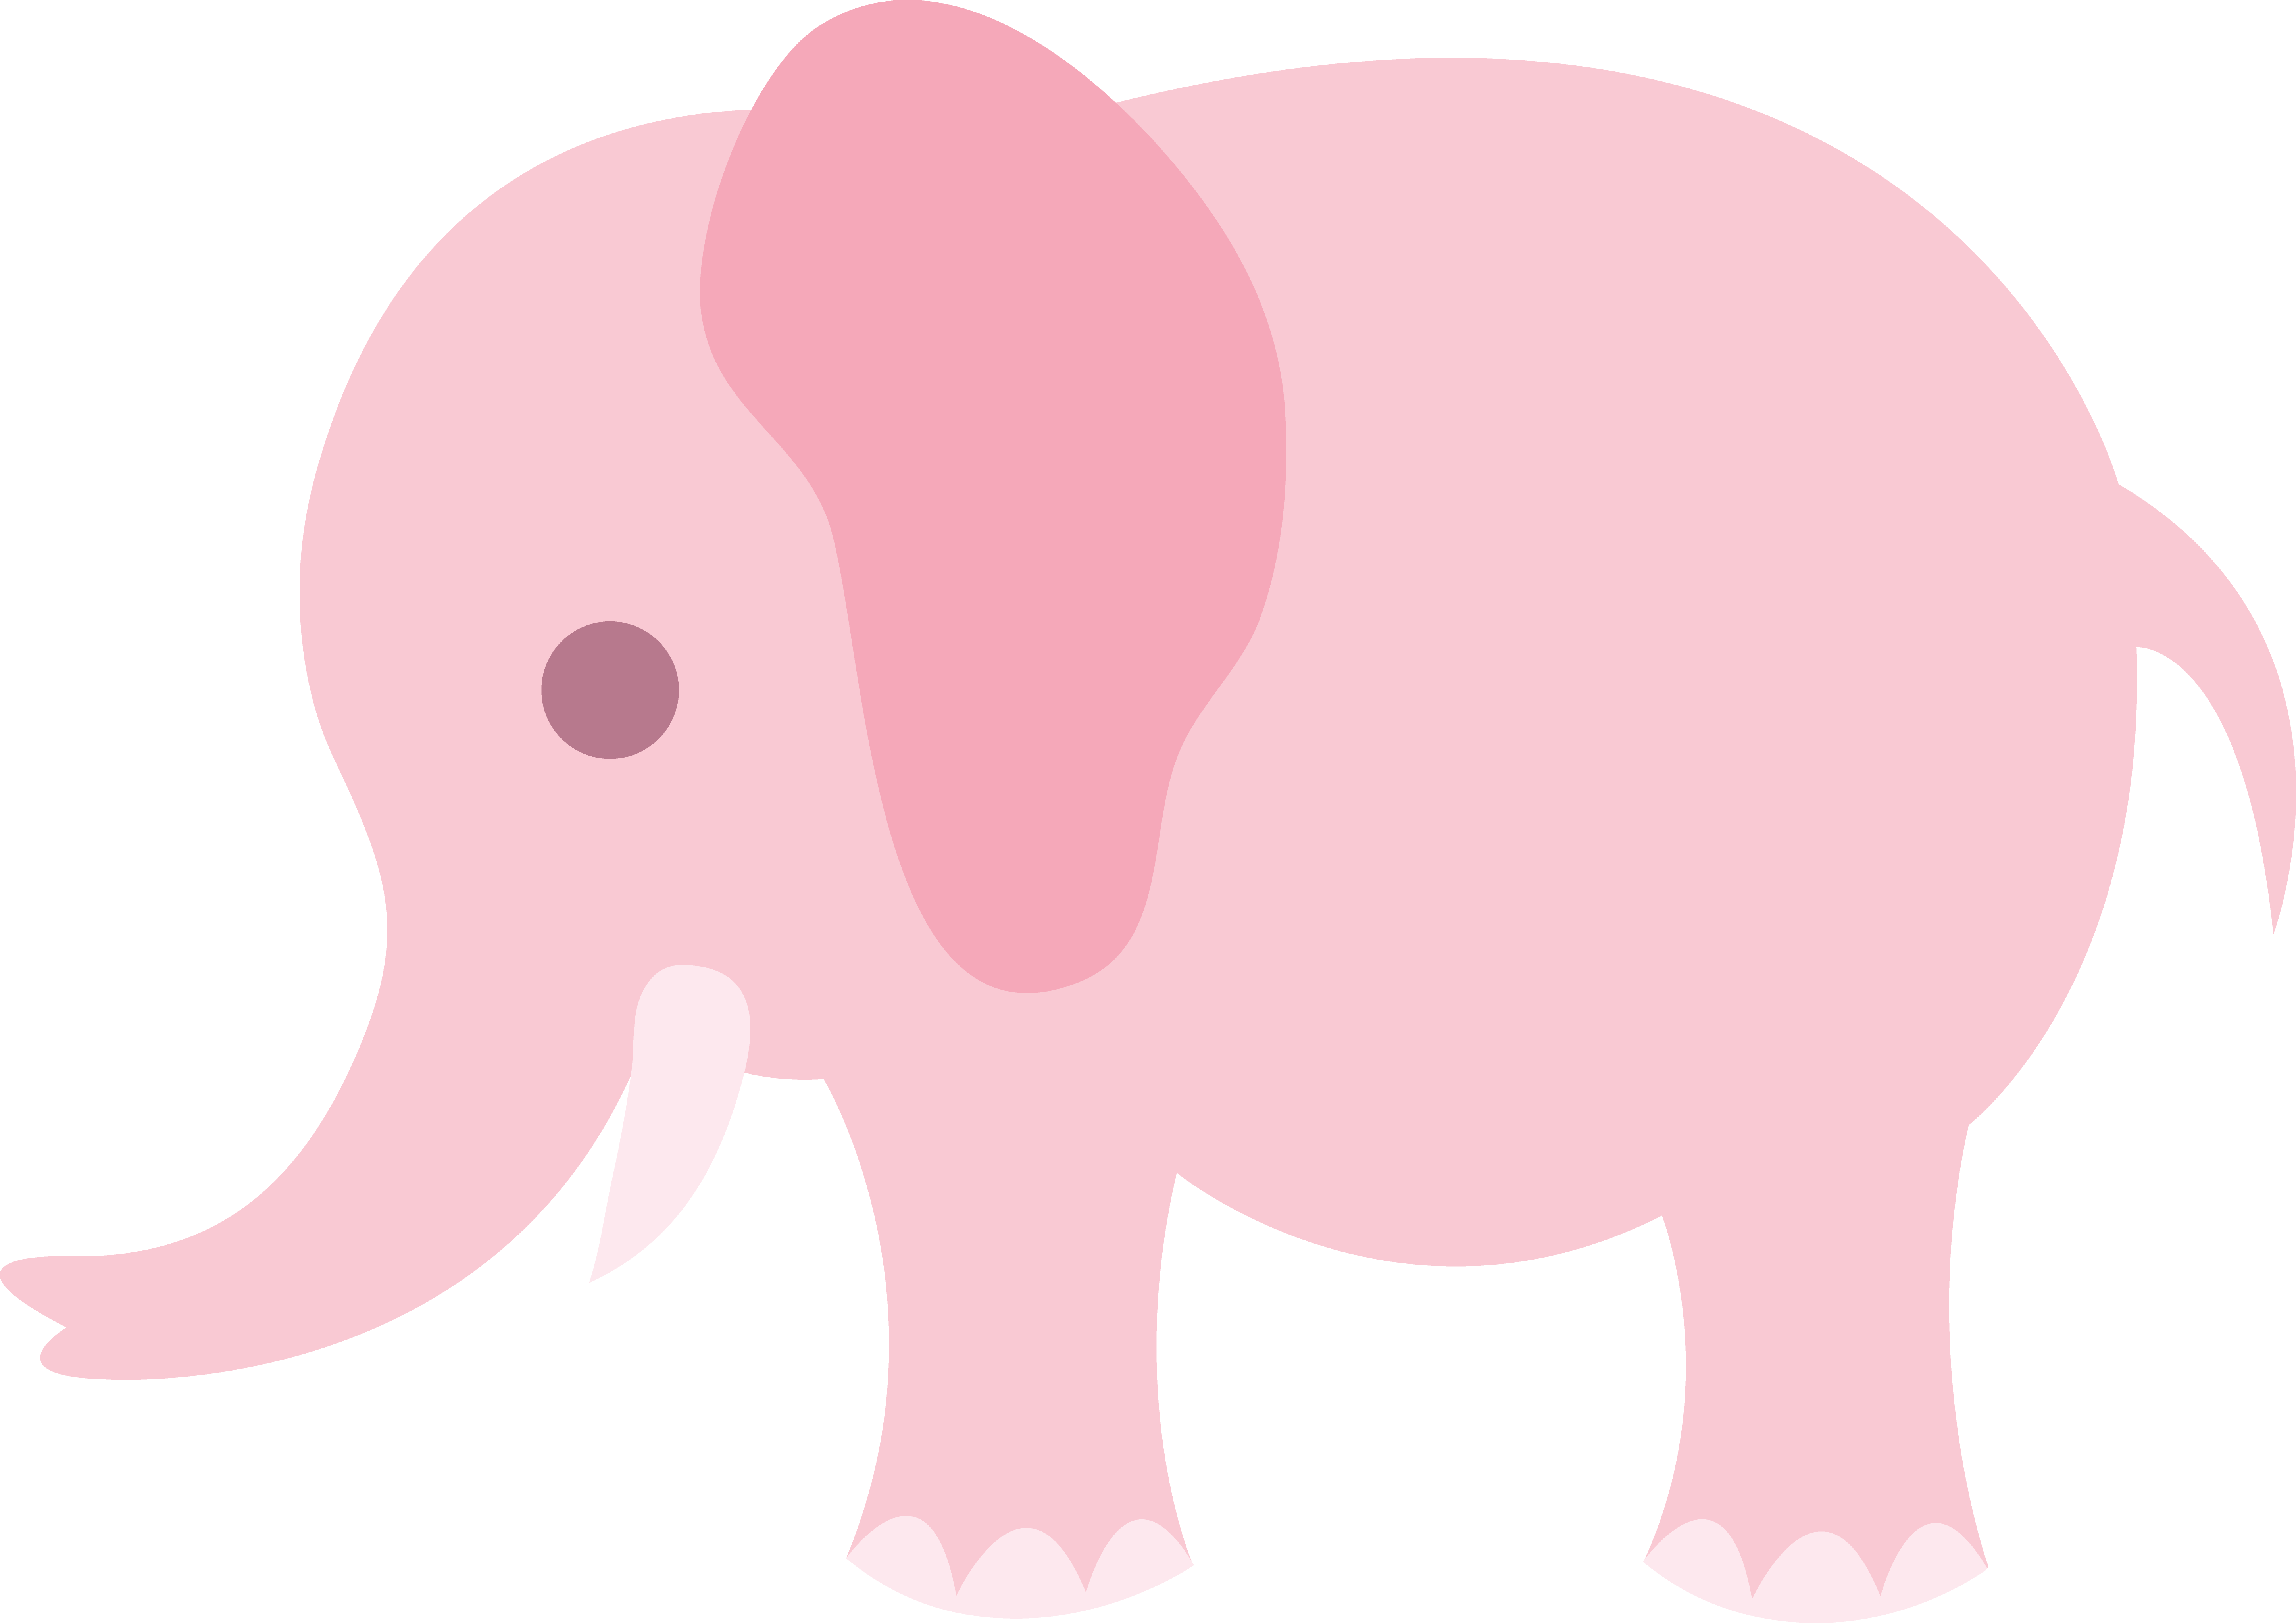 Pink Baby Elephant Cartoon Images & Pictures - Becuo